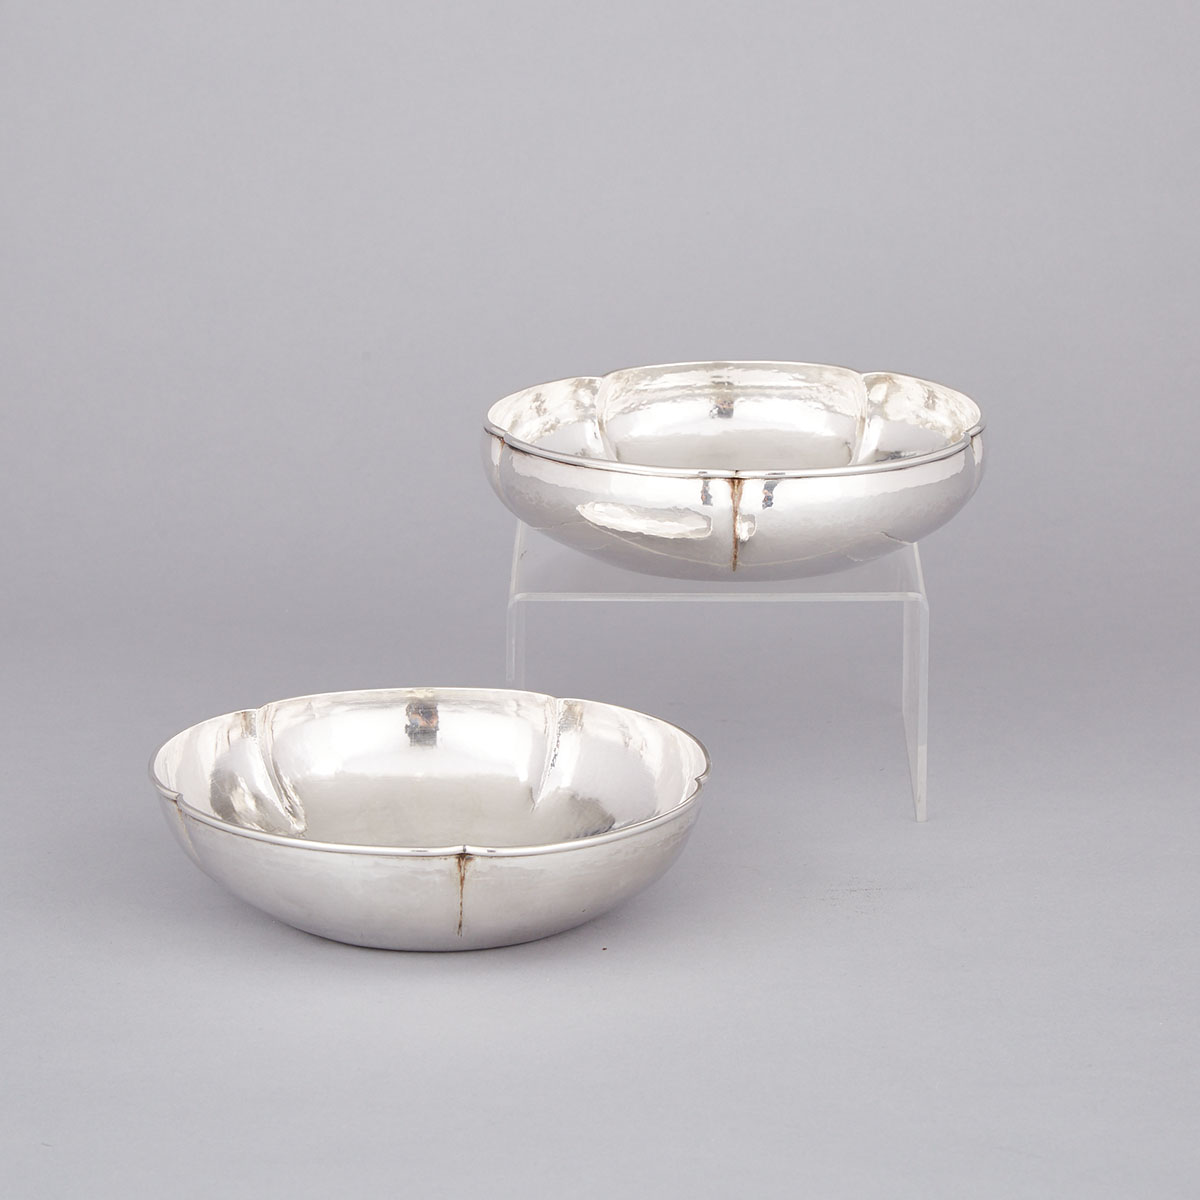 Pair of American Arts & Crafts Silver Bowls, The Kalo Shop, Chicago, Ill., early 20th century